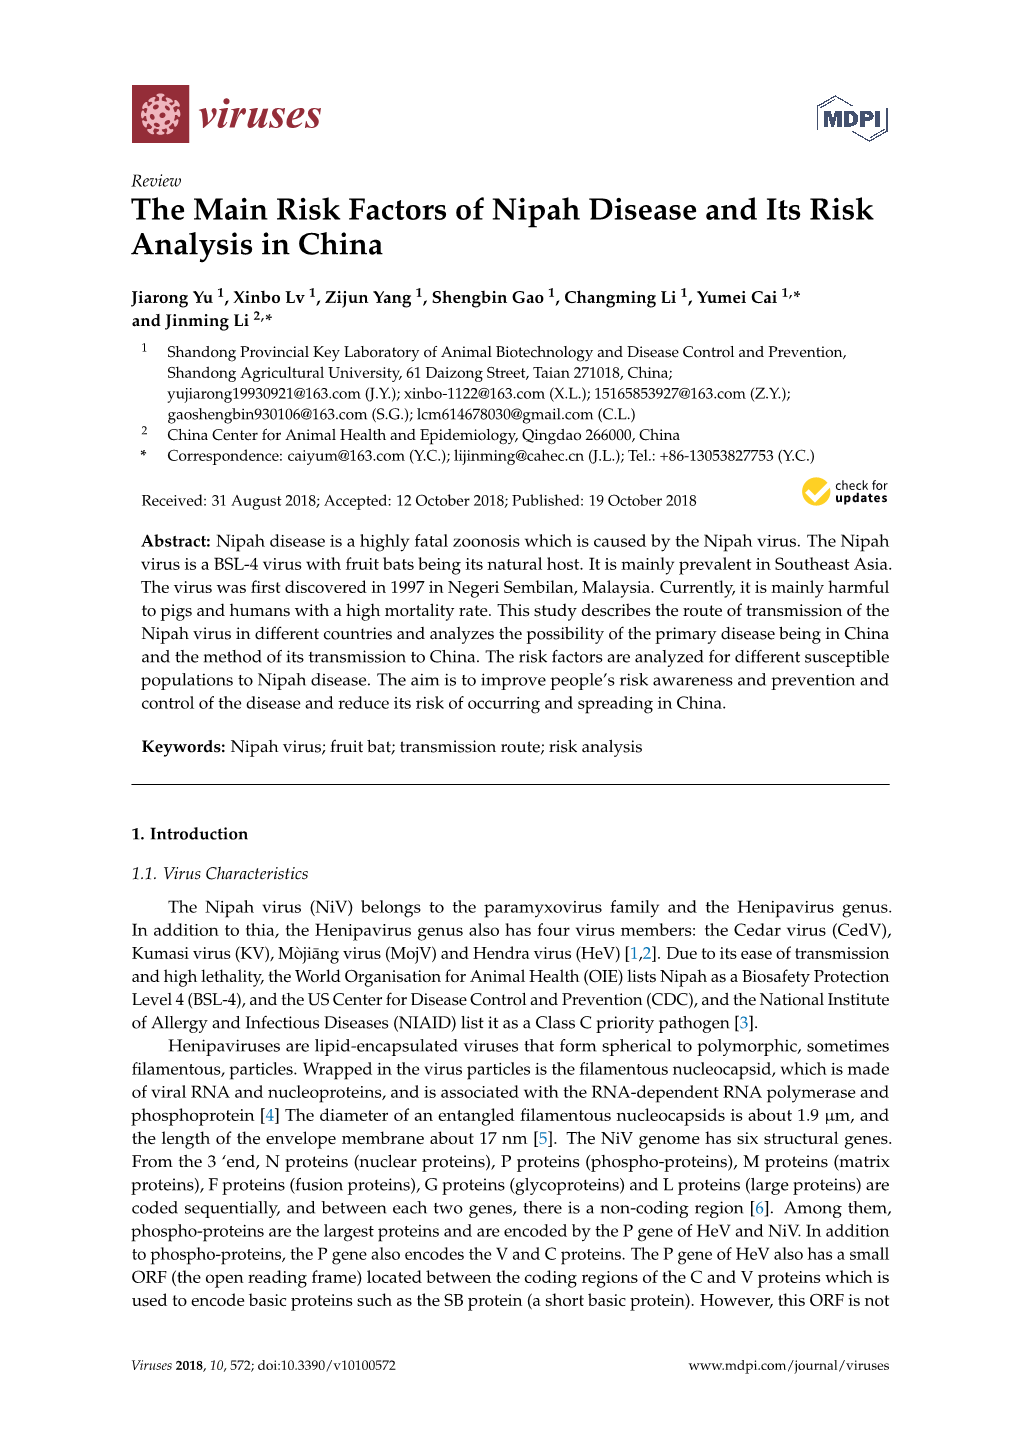 The Main Risk Factors of Nipah Disease and Its Risk Analysis in China